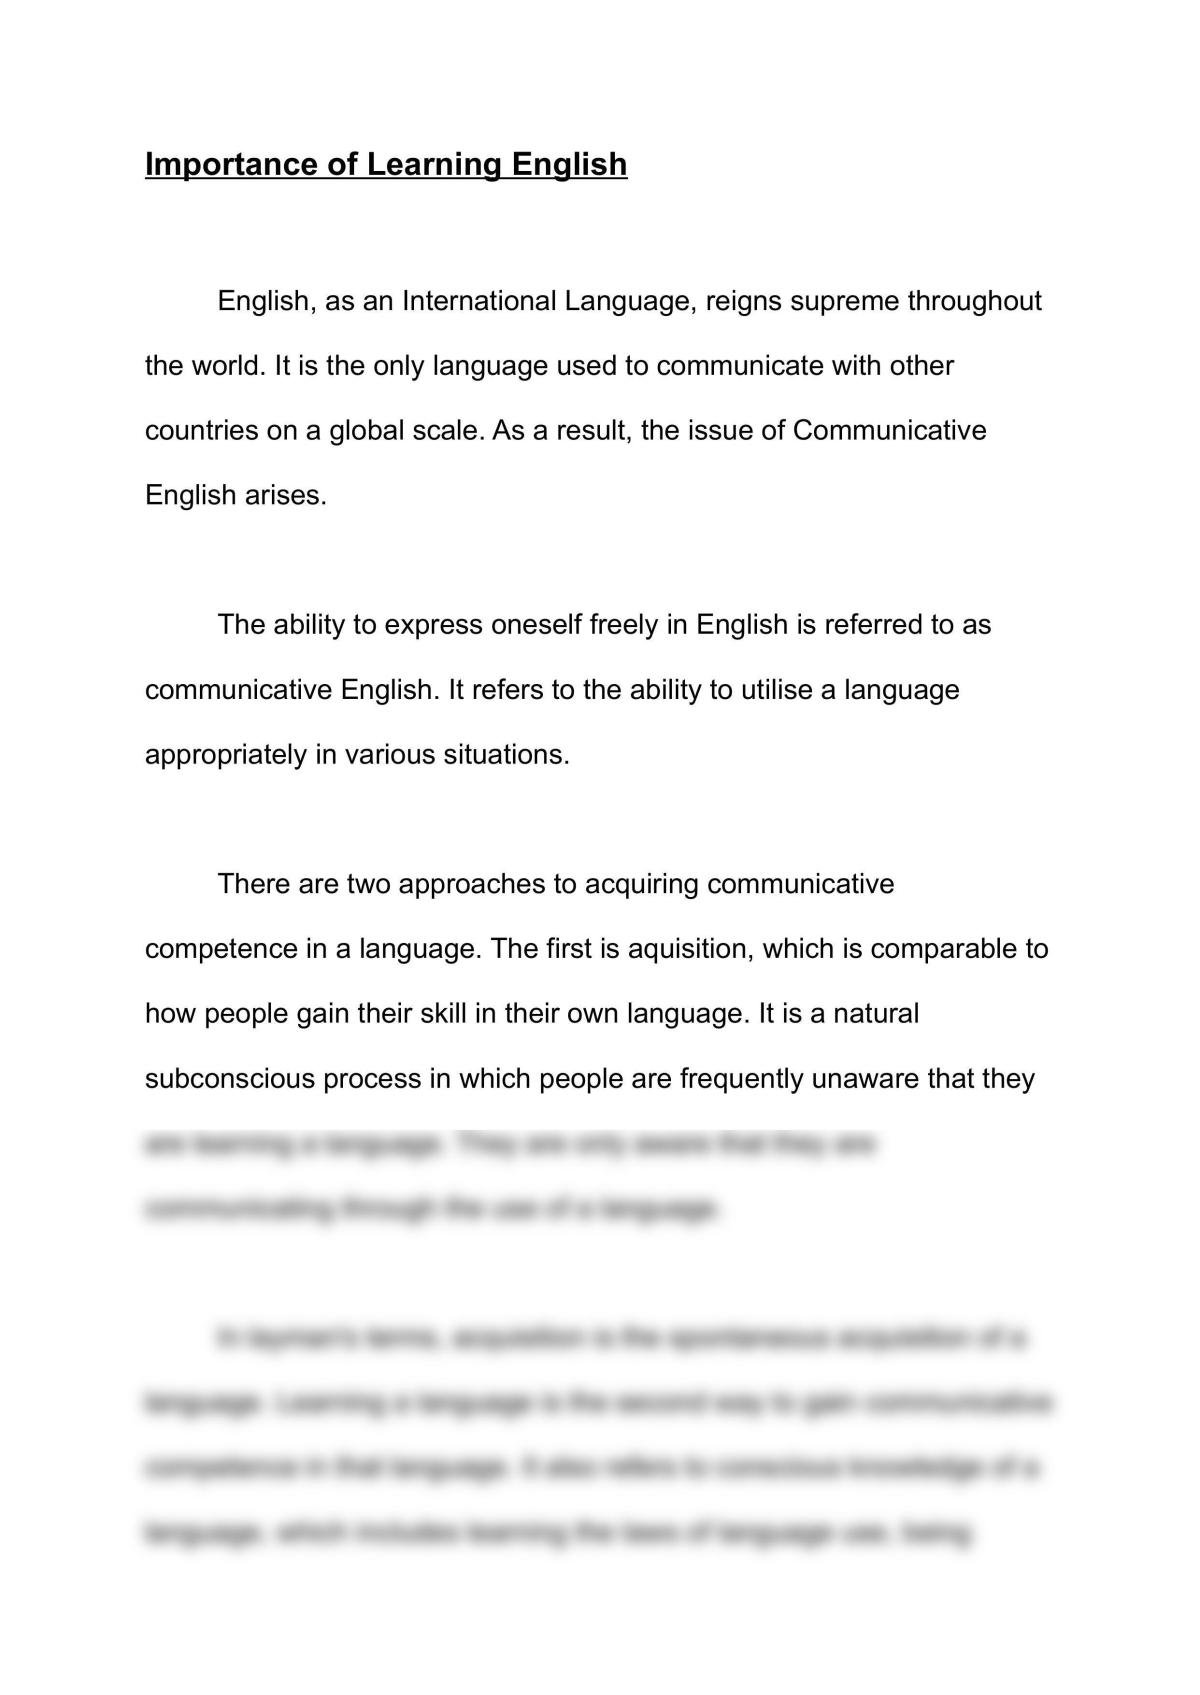 importance of learning new language essay